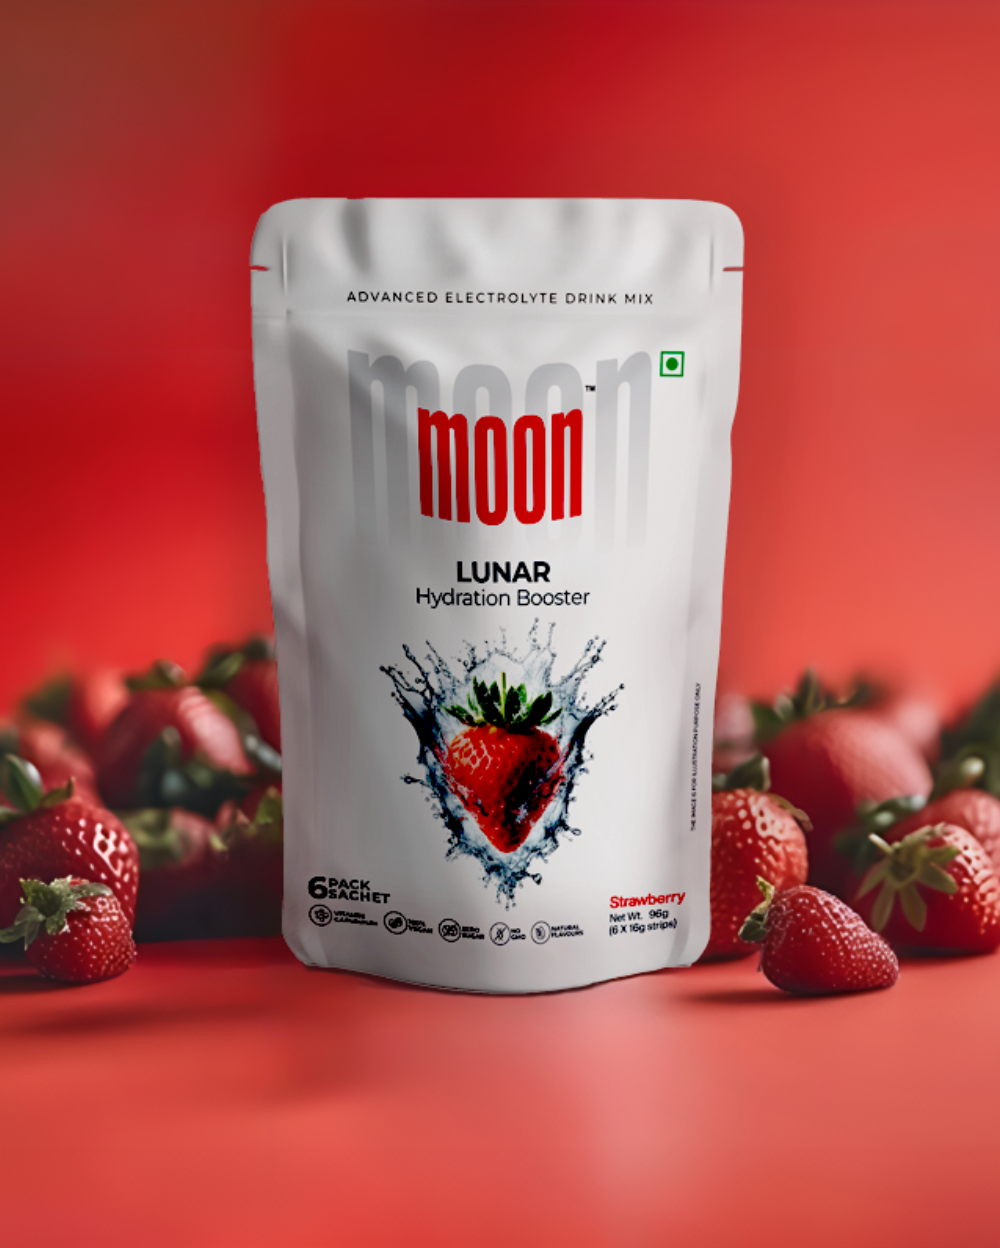 A pack of MOONFREEZE FOODS PRIVATE LIMITED's Moon Strawberry Lunar Hydration Booster - Pack of 3 on a red background.